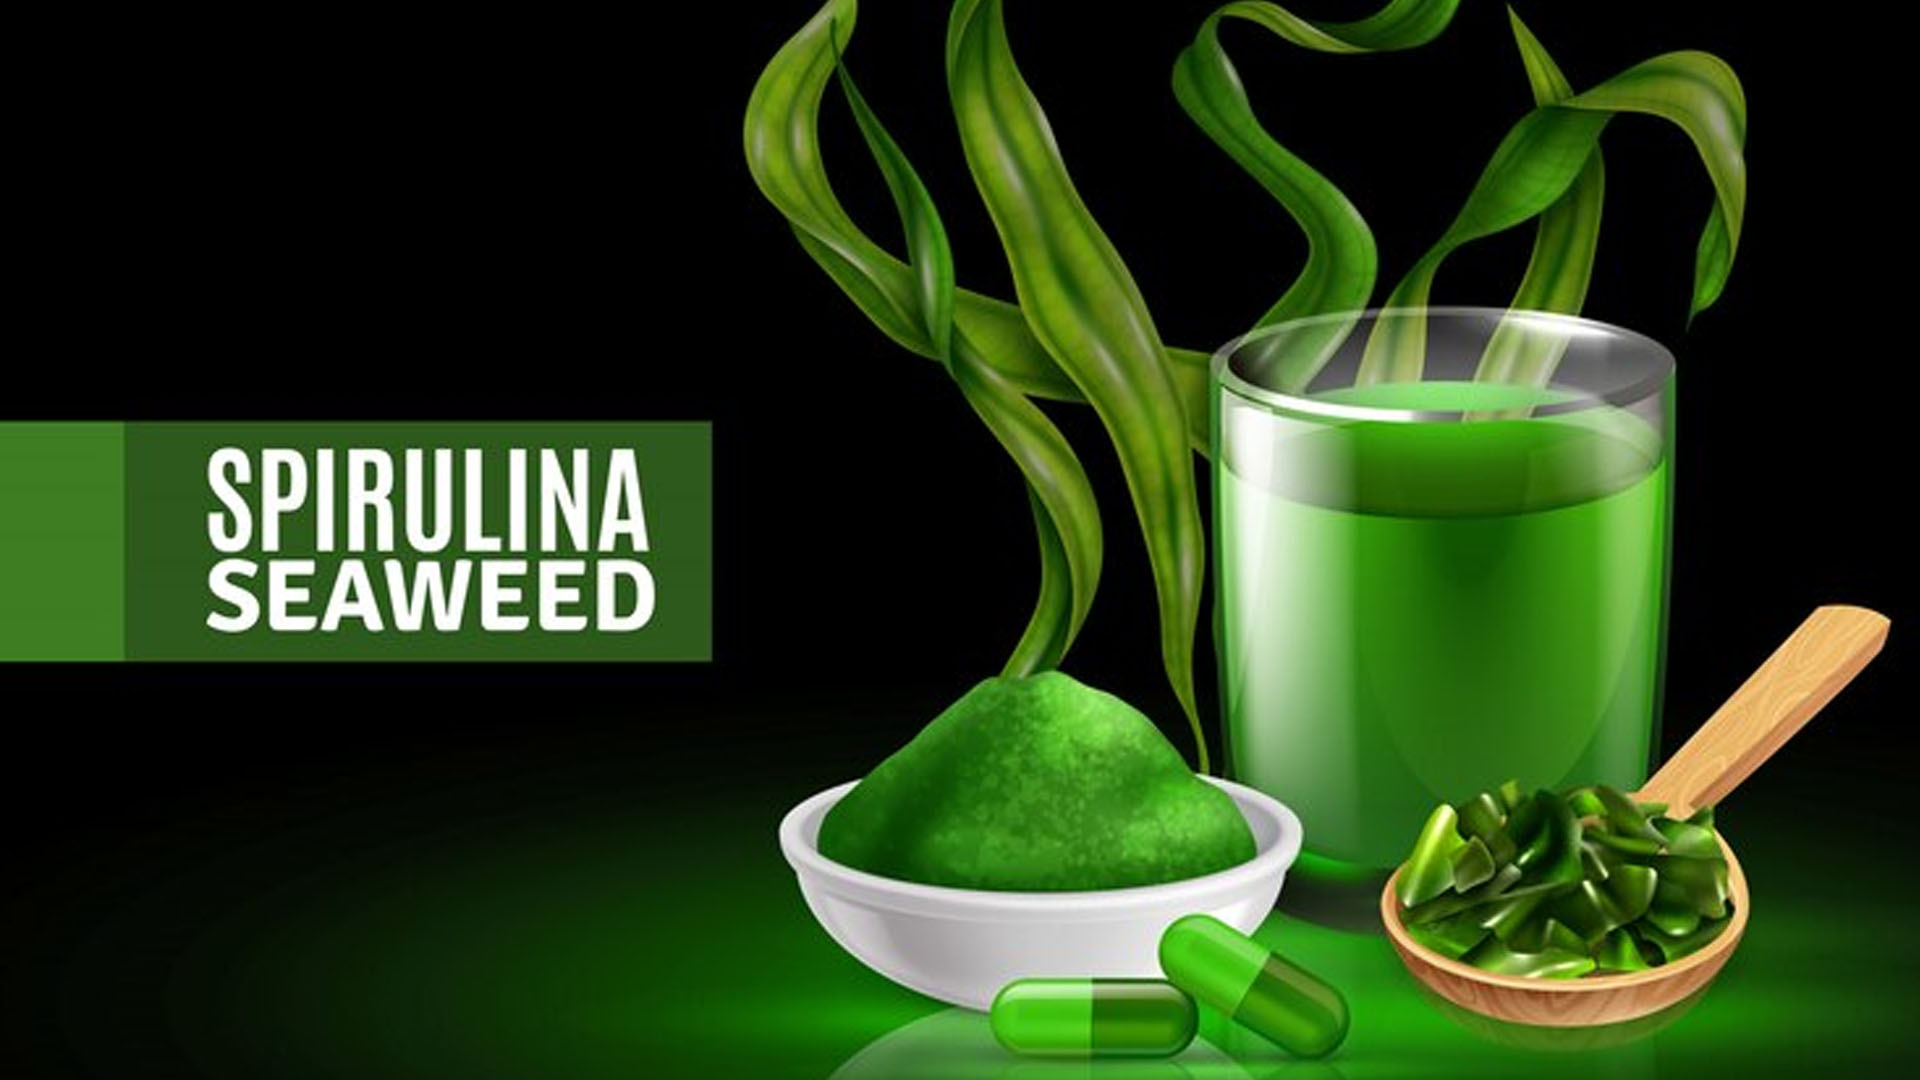 What are the Health Benefits of Spirulina?